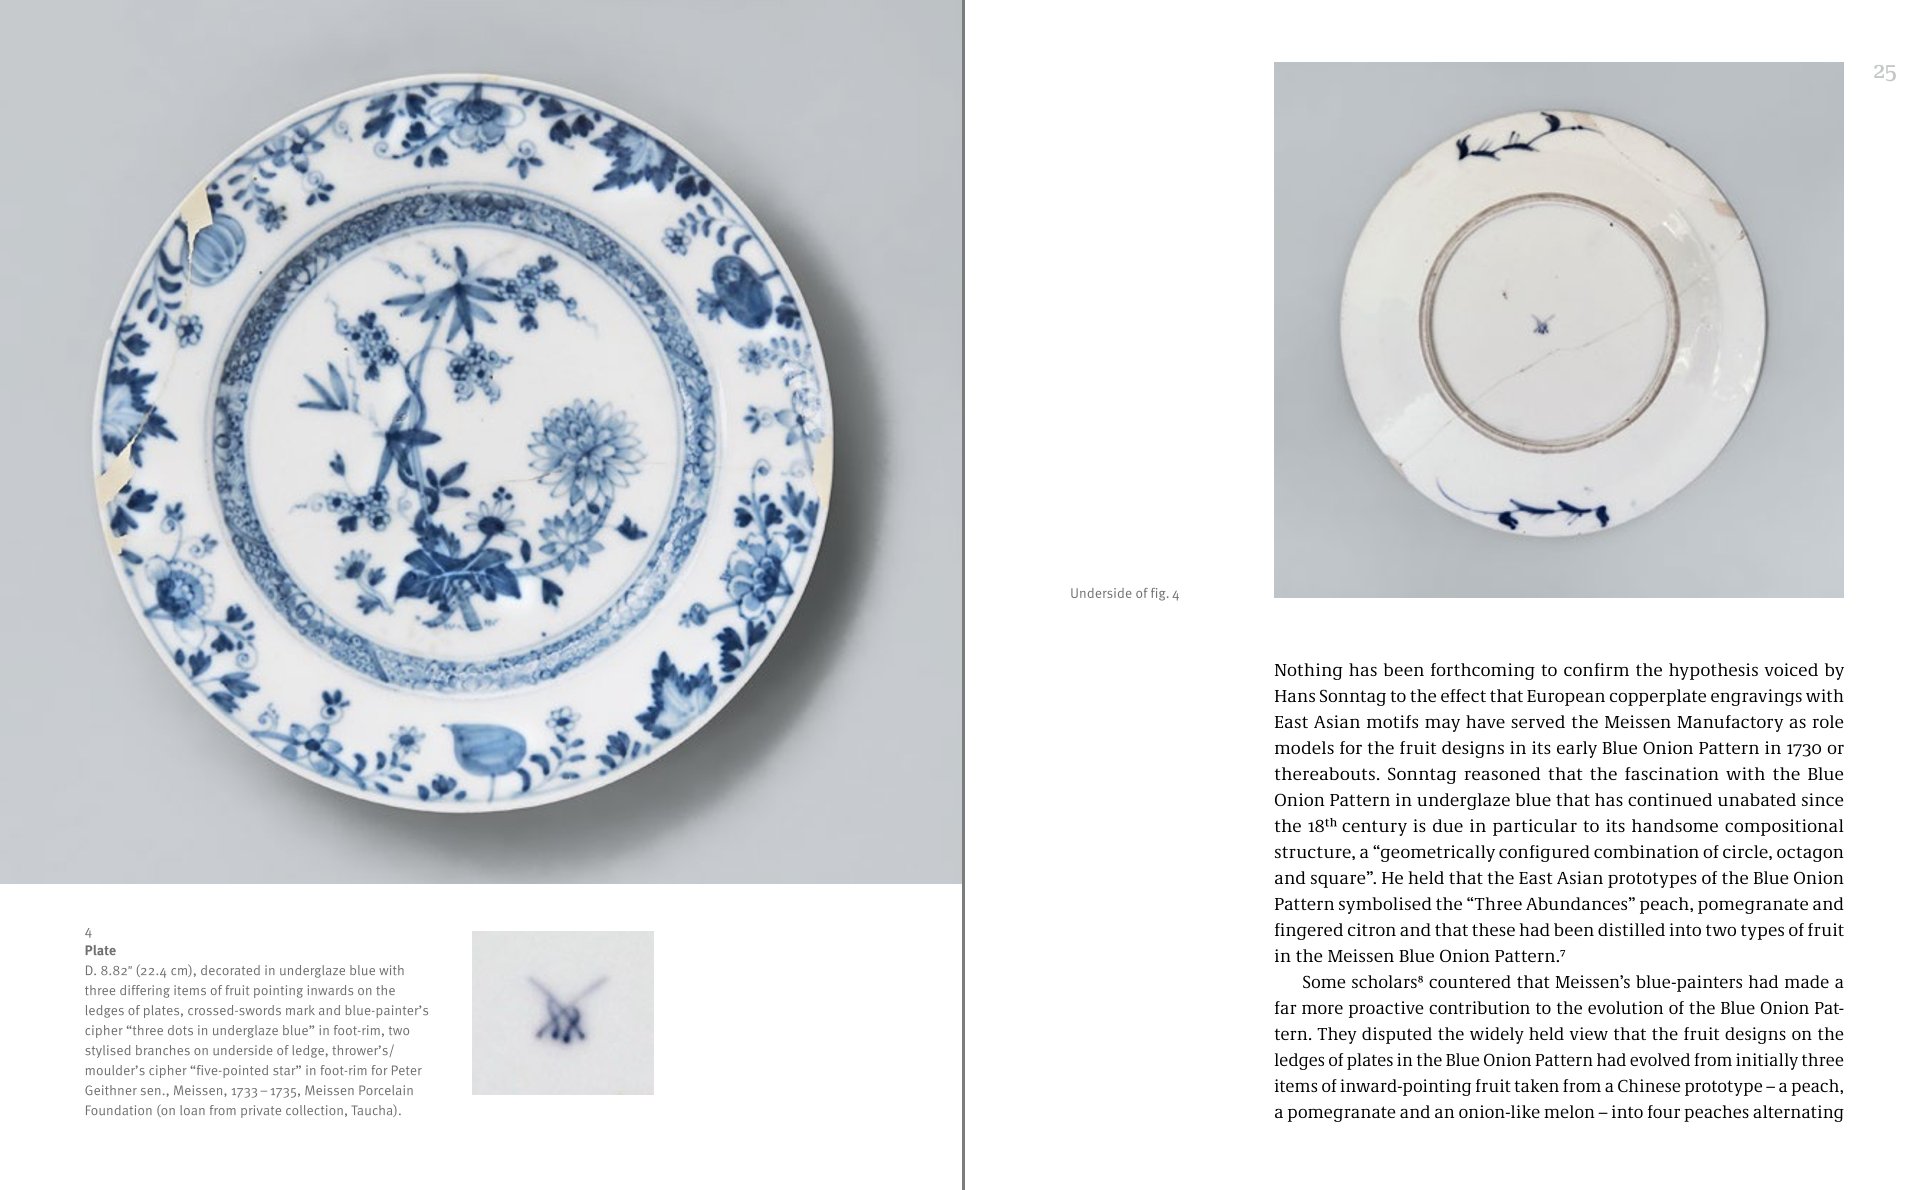 From China to Meissen | 300 Years of Blue Onion Pattern